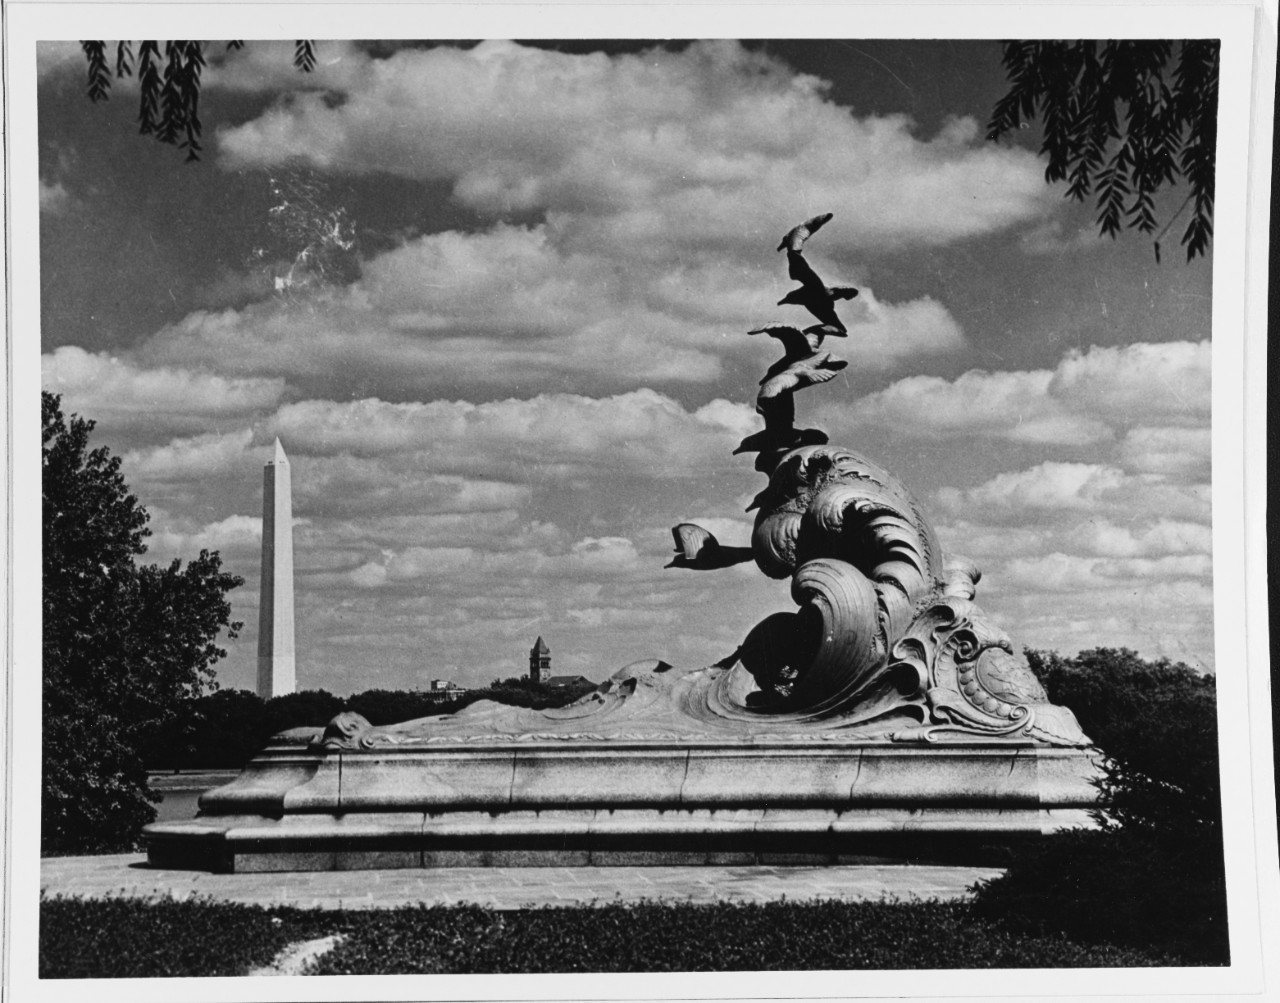 U.S. Navy and Marine Corps Memorial, Dedicated to Americans Lost at Sea. Washington, D.C. Erected 1934